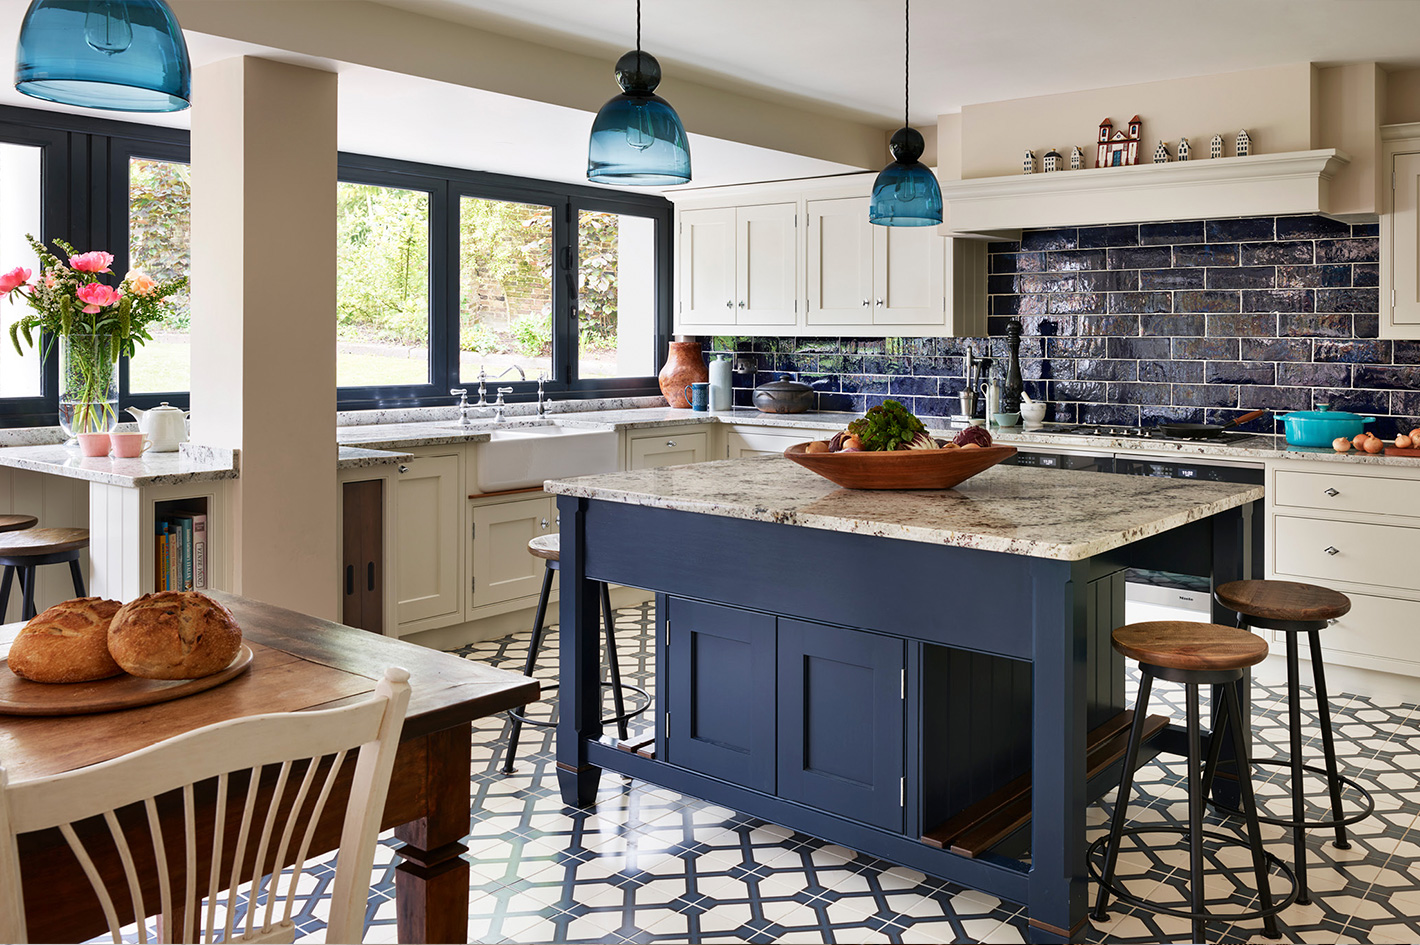 These 11 Farmhouse Kitchen Ideas Are Rustic-Chic Reimagined